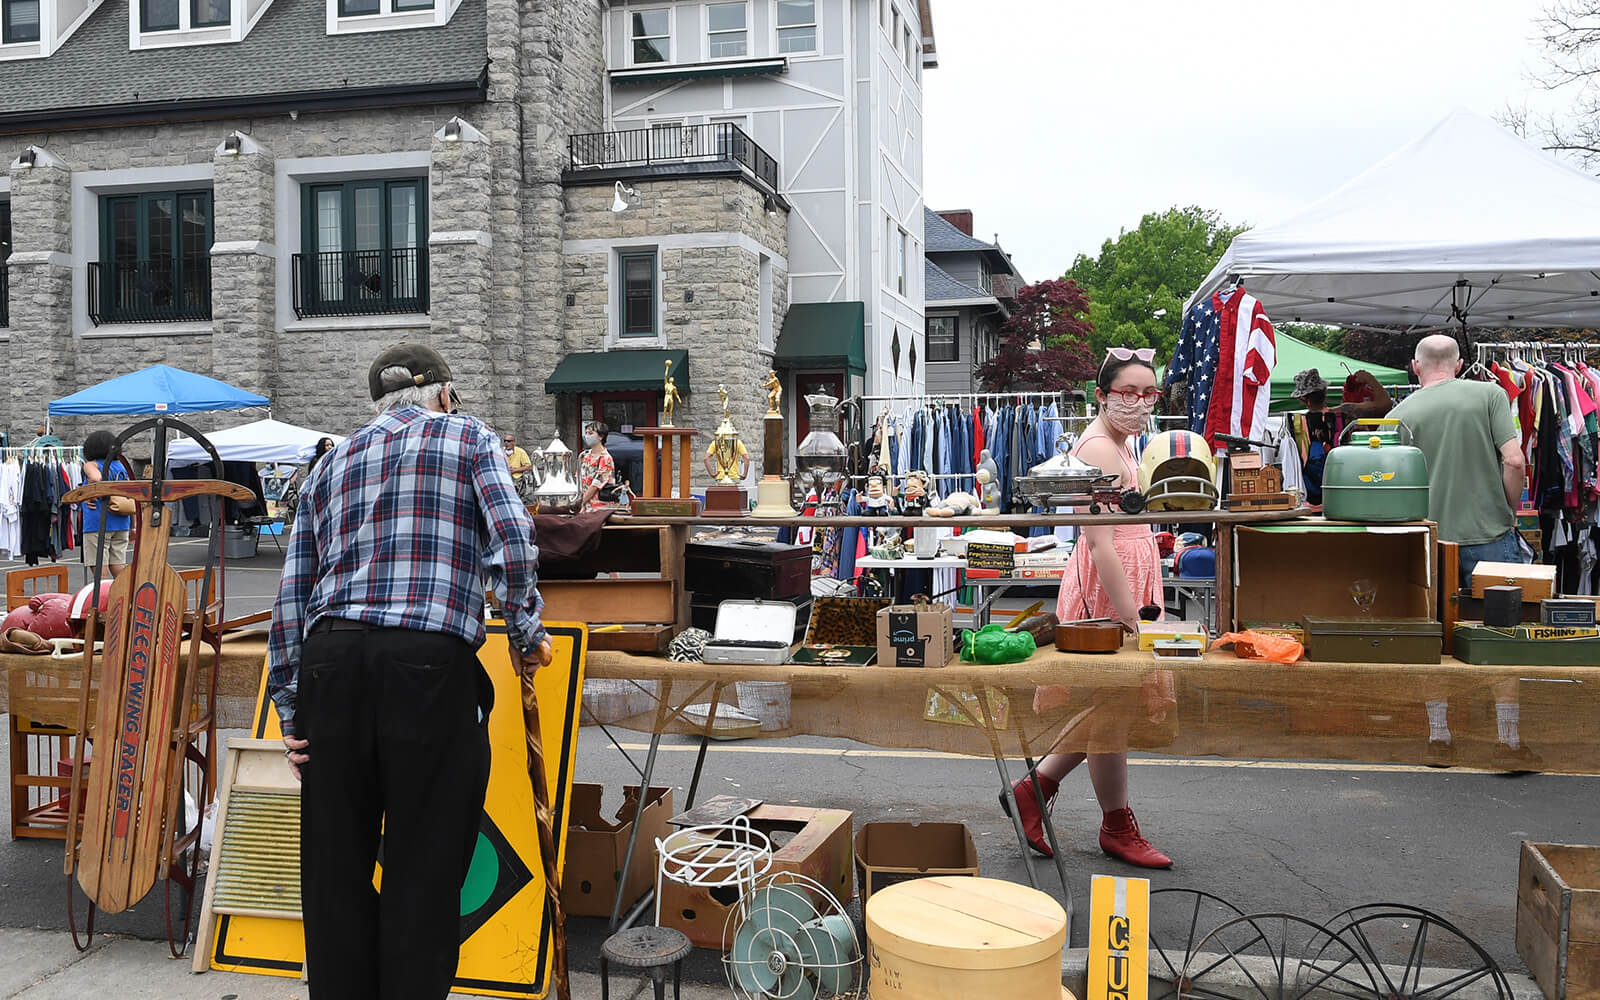 People perusing The Peddler flea and art market in Buffalo, NY